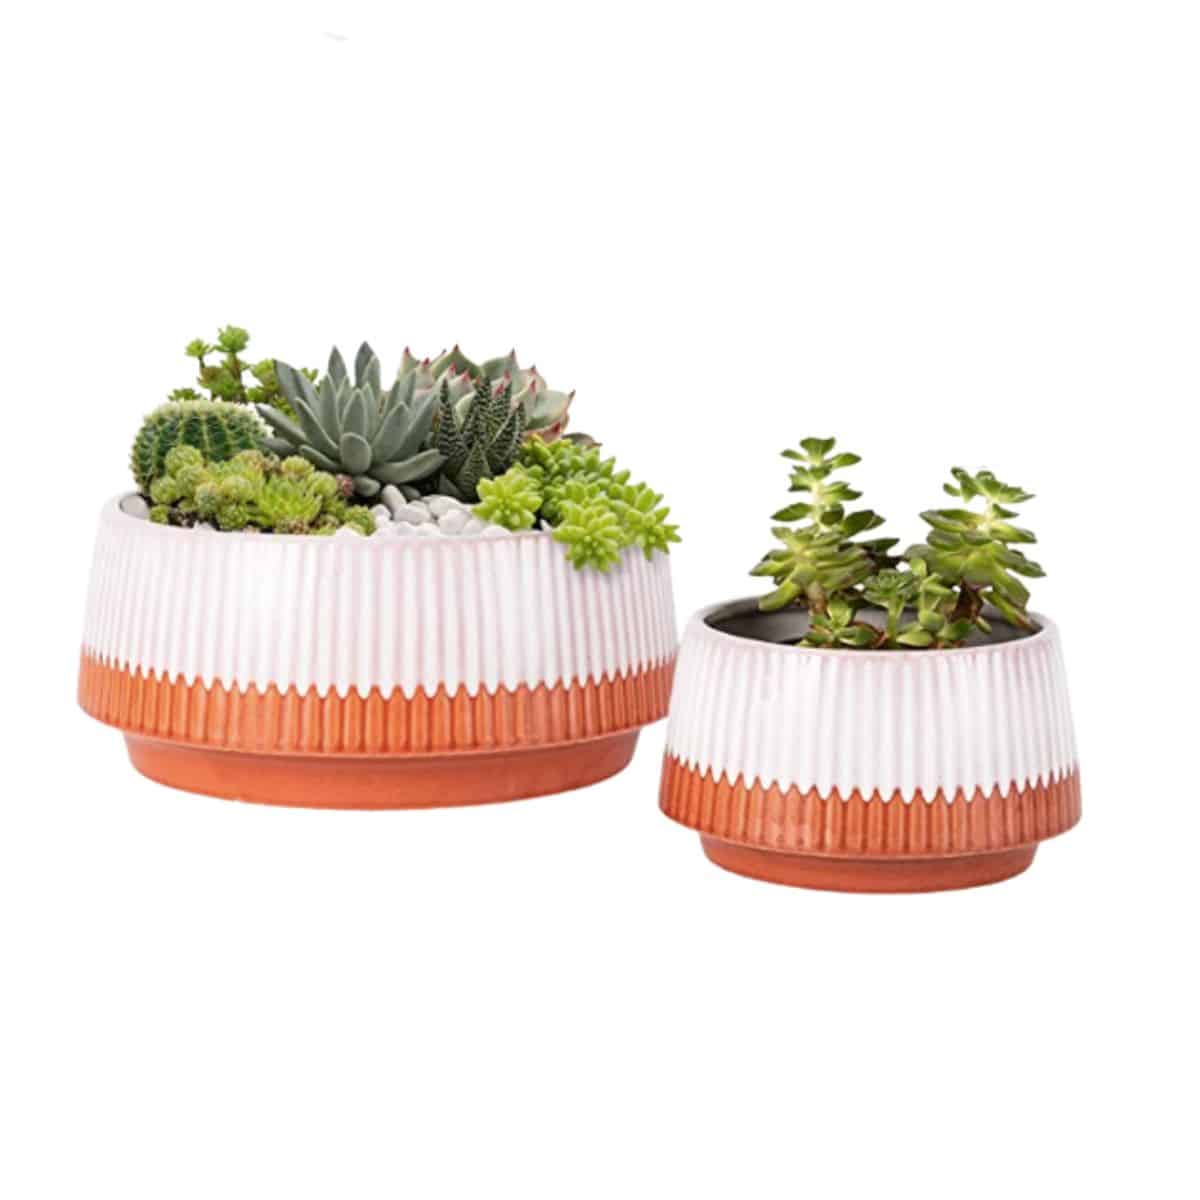 two pack ceramic glazed plant bowl with succulents planted inside and a drainage hole from amazon